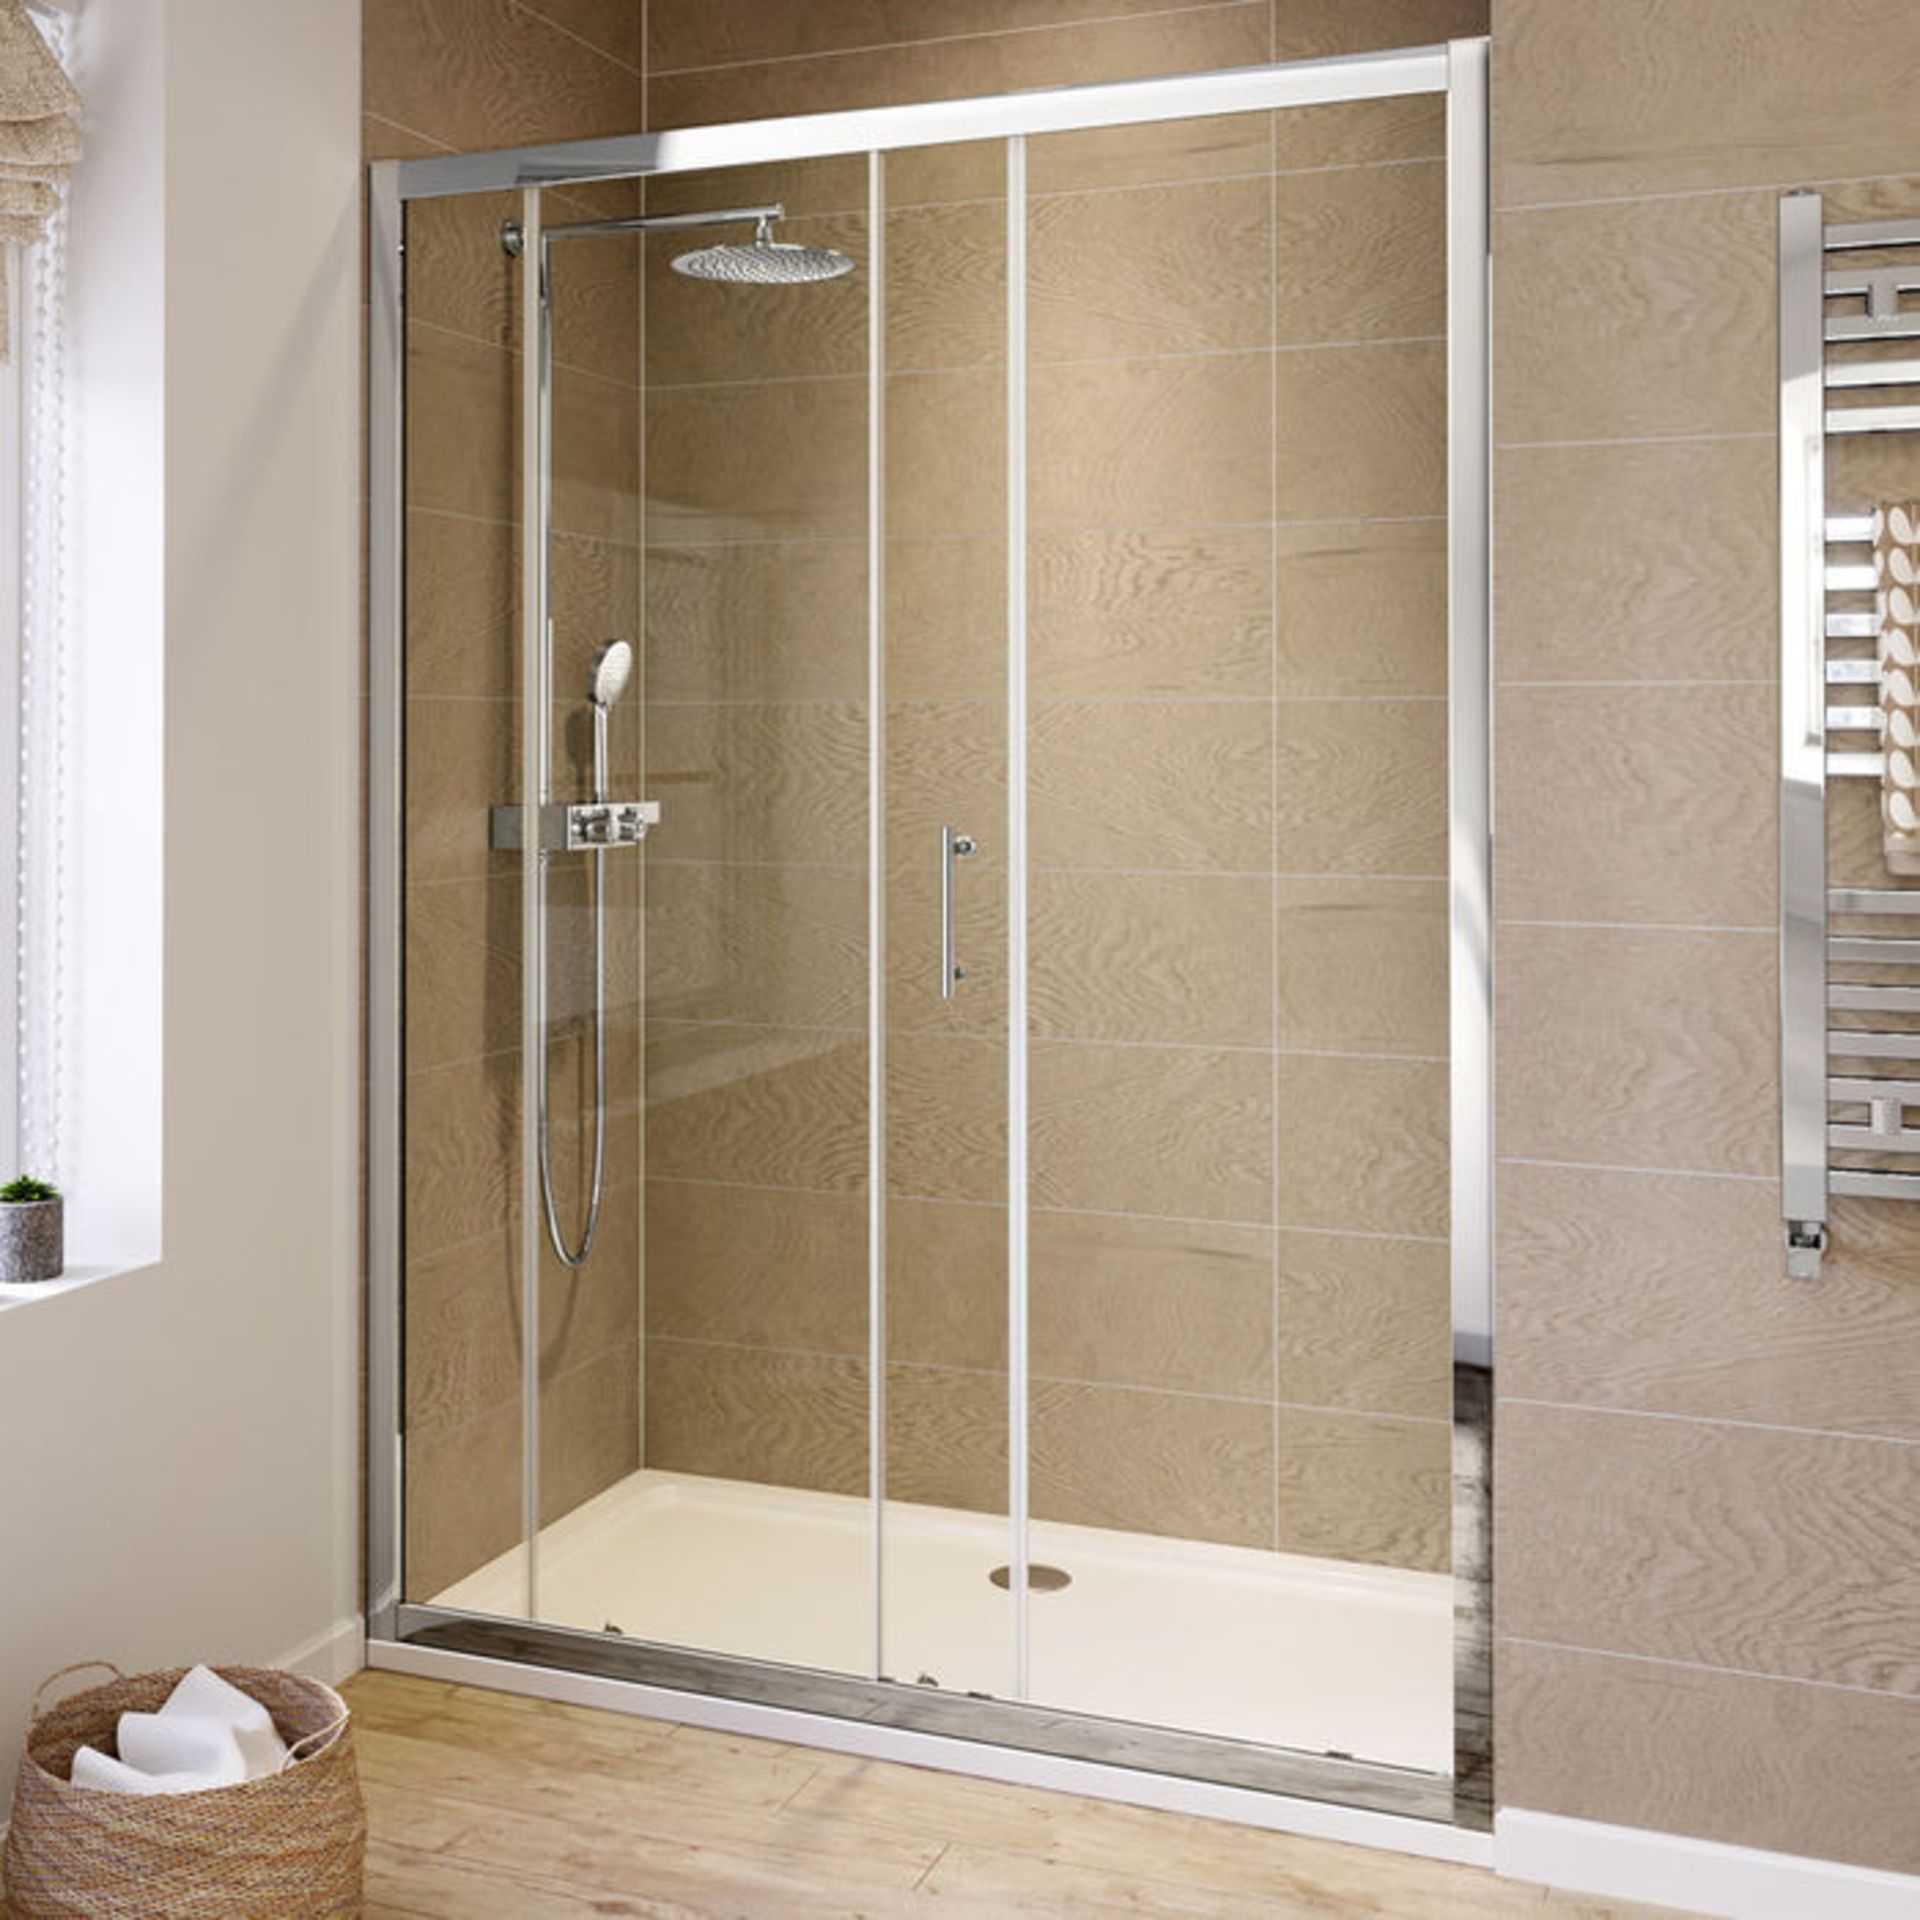 (ZA20) 1400mm - 6mm - Elements Sliding Shower Door. RRP £299.99._x00D_6mm Safety Glass_x00D_Fully - Image 2 of 3